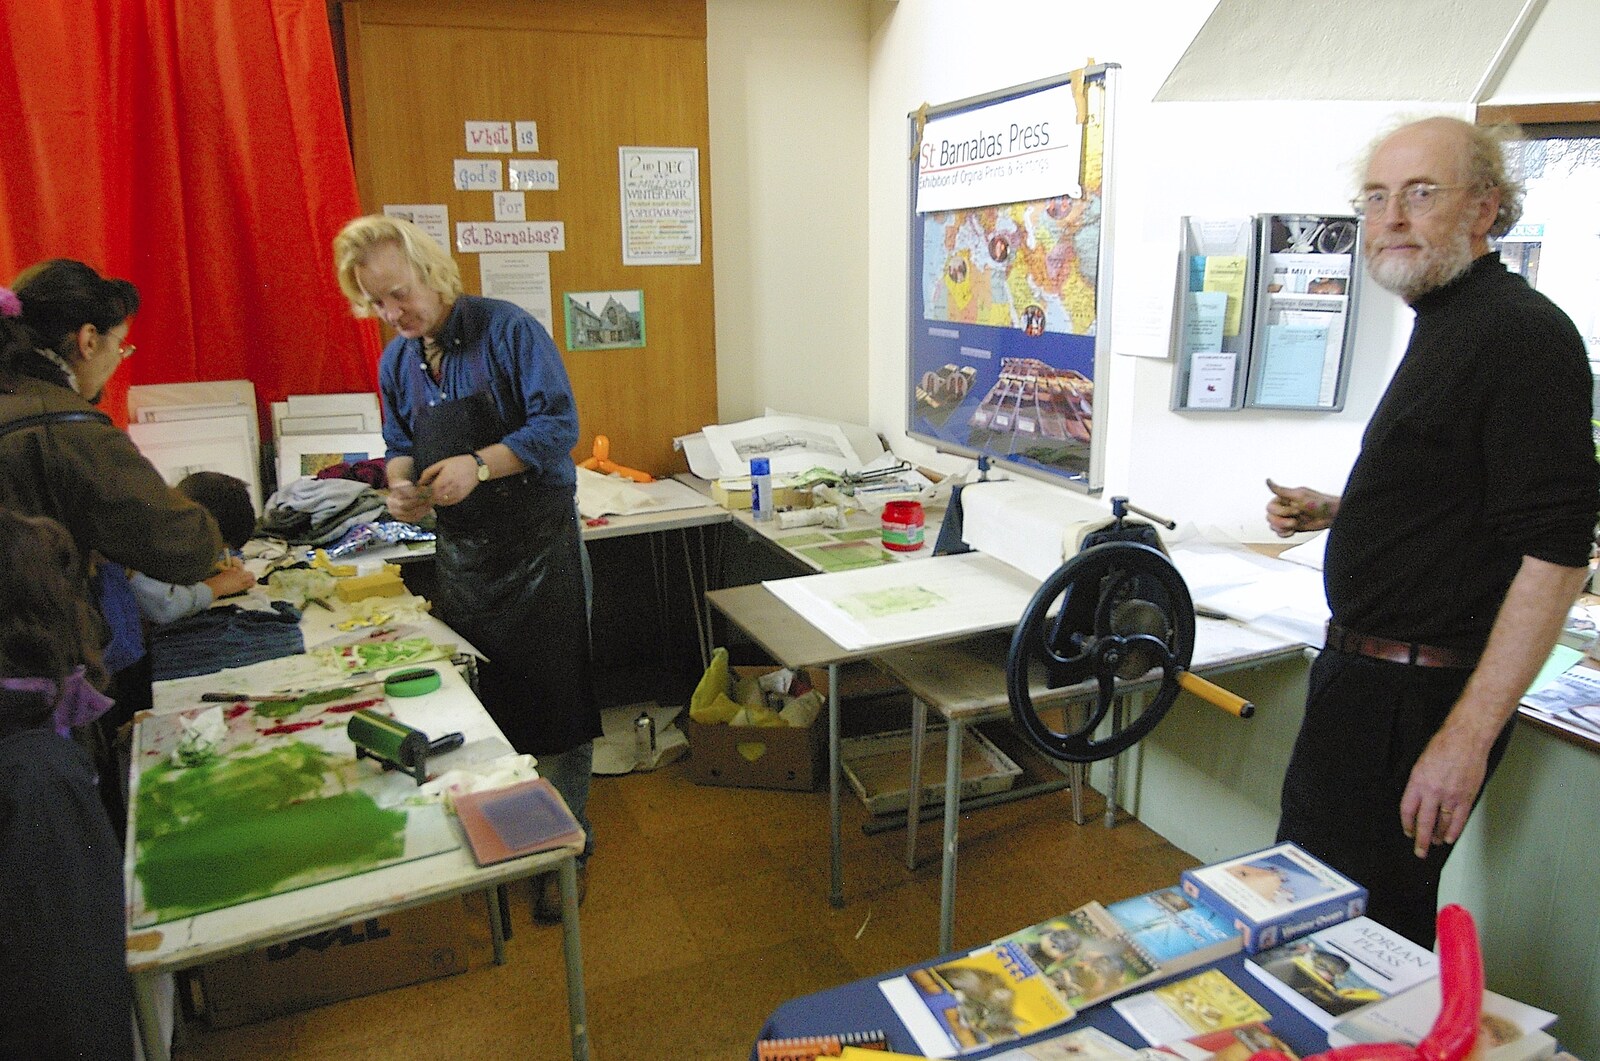 The St. Barnabas Press from The Winter Fair, Mill Road, Cambridge - 2nd December 2006